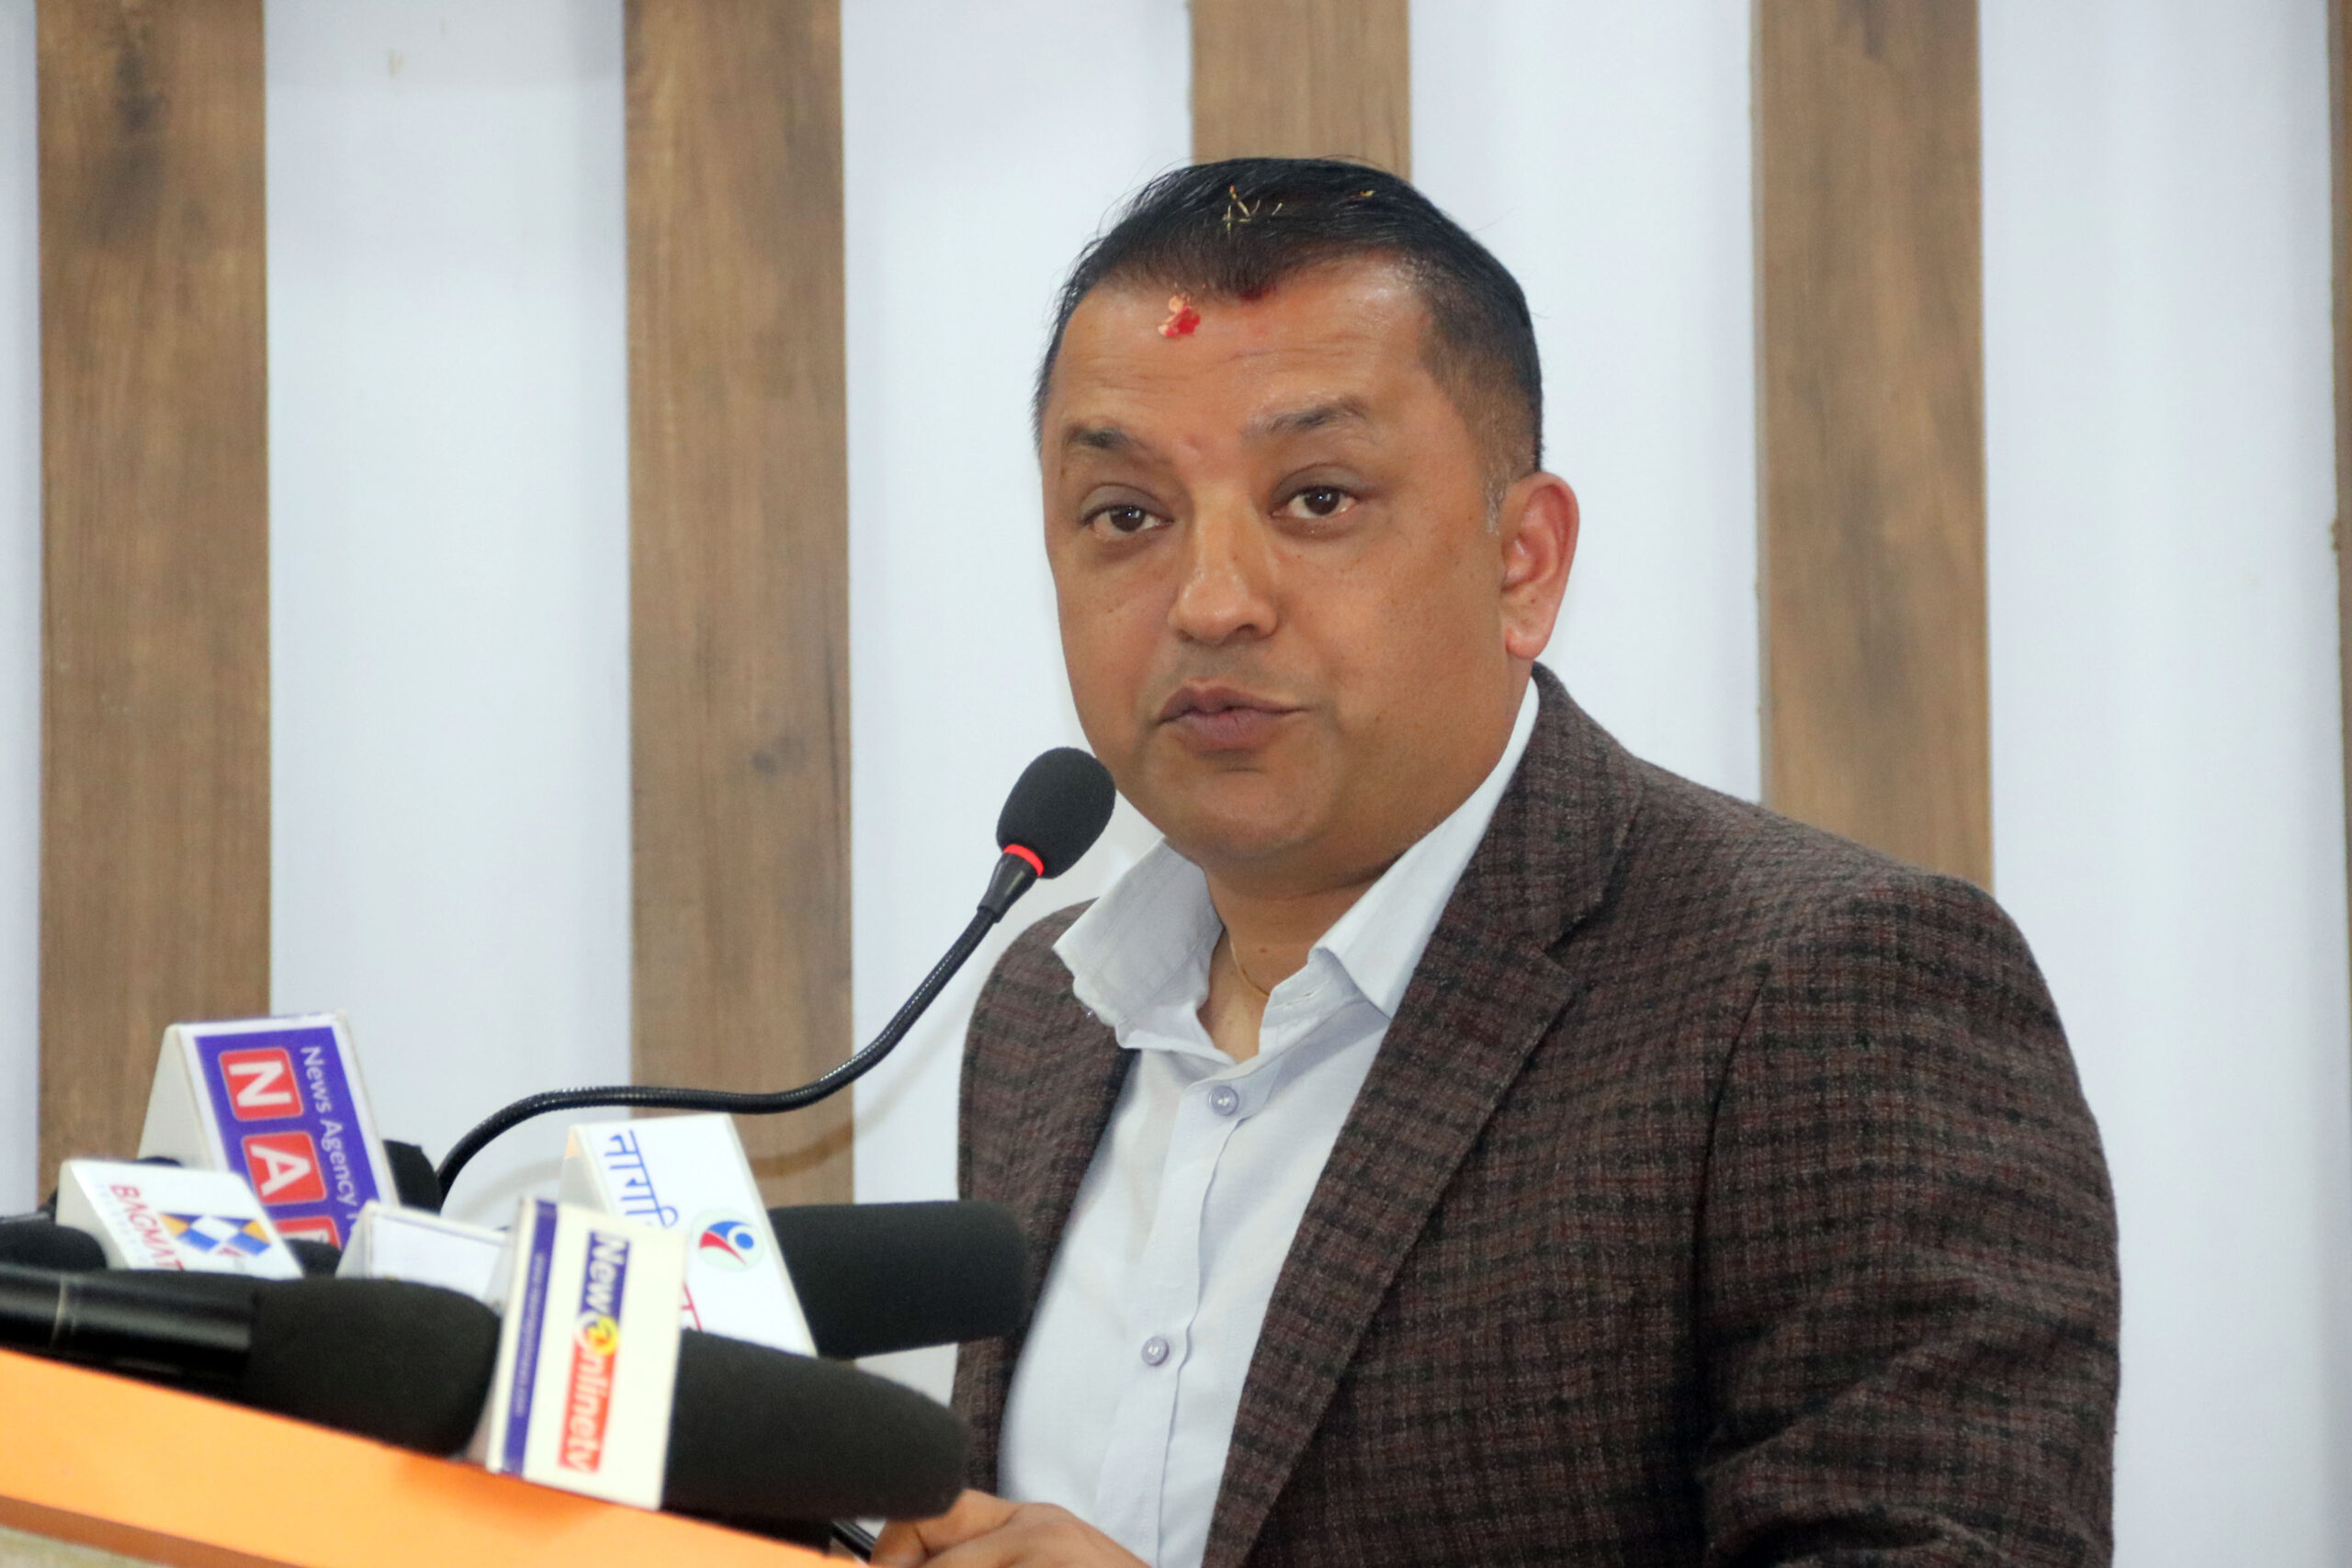 NC General Secretary Thapa objects to exclusion of statements in Lalita Niwas Case